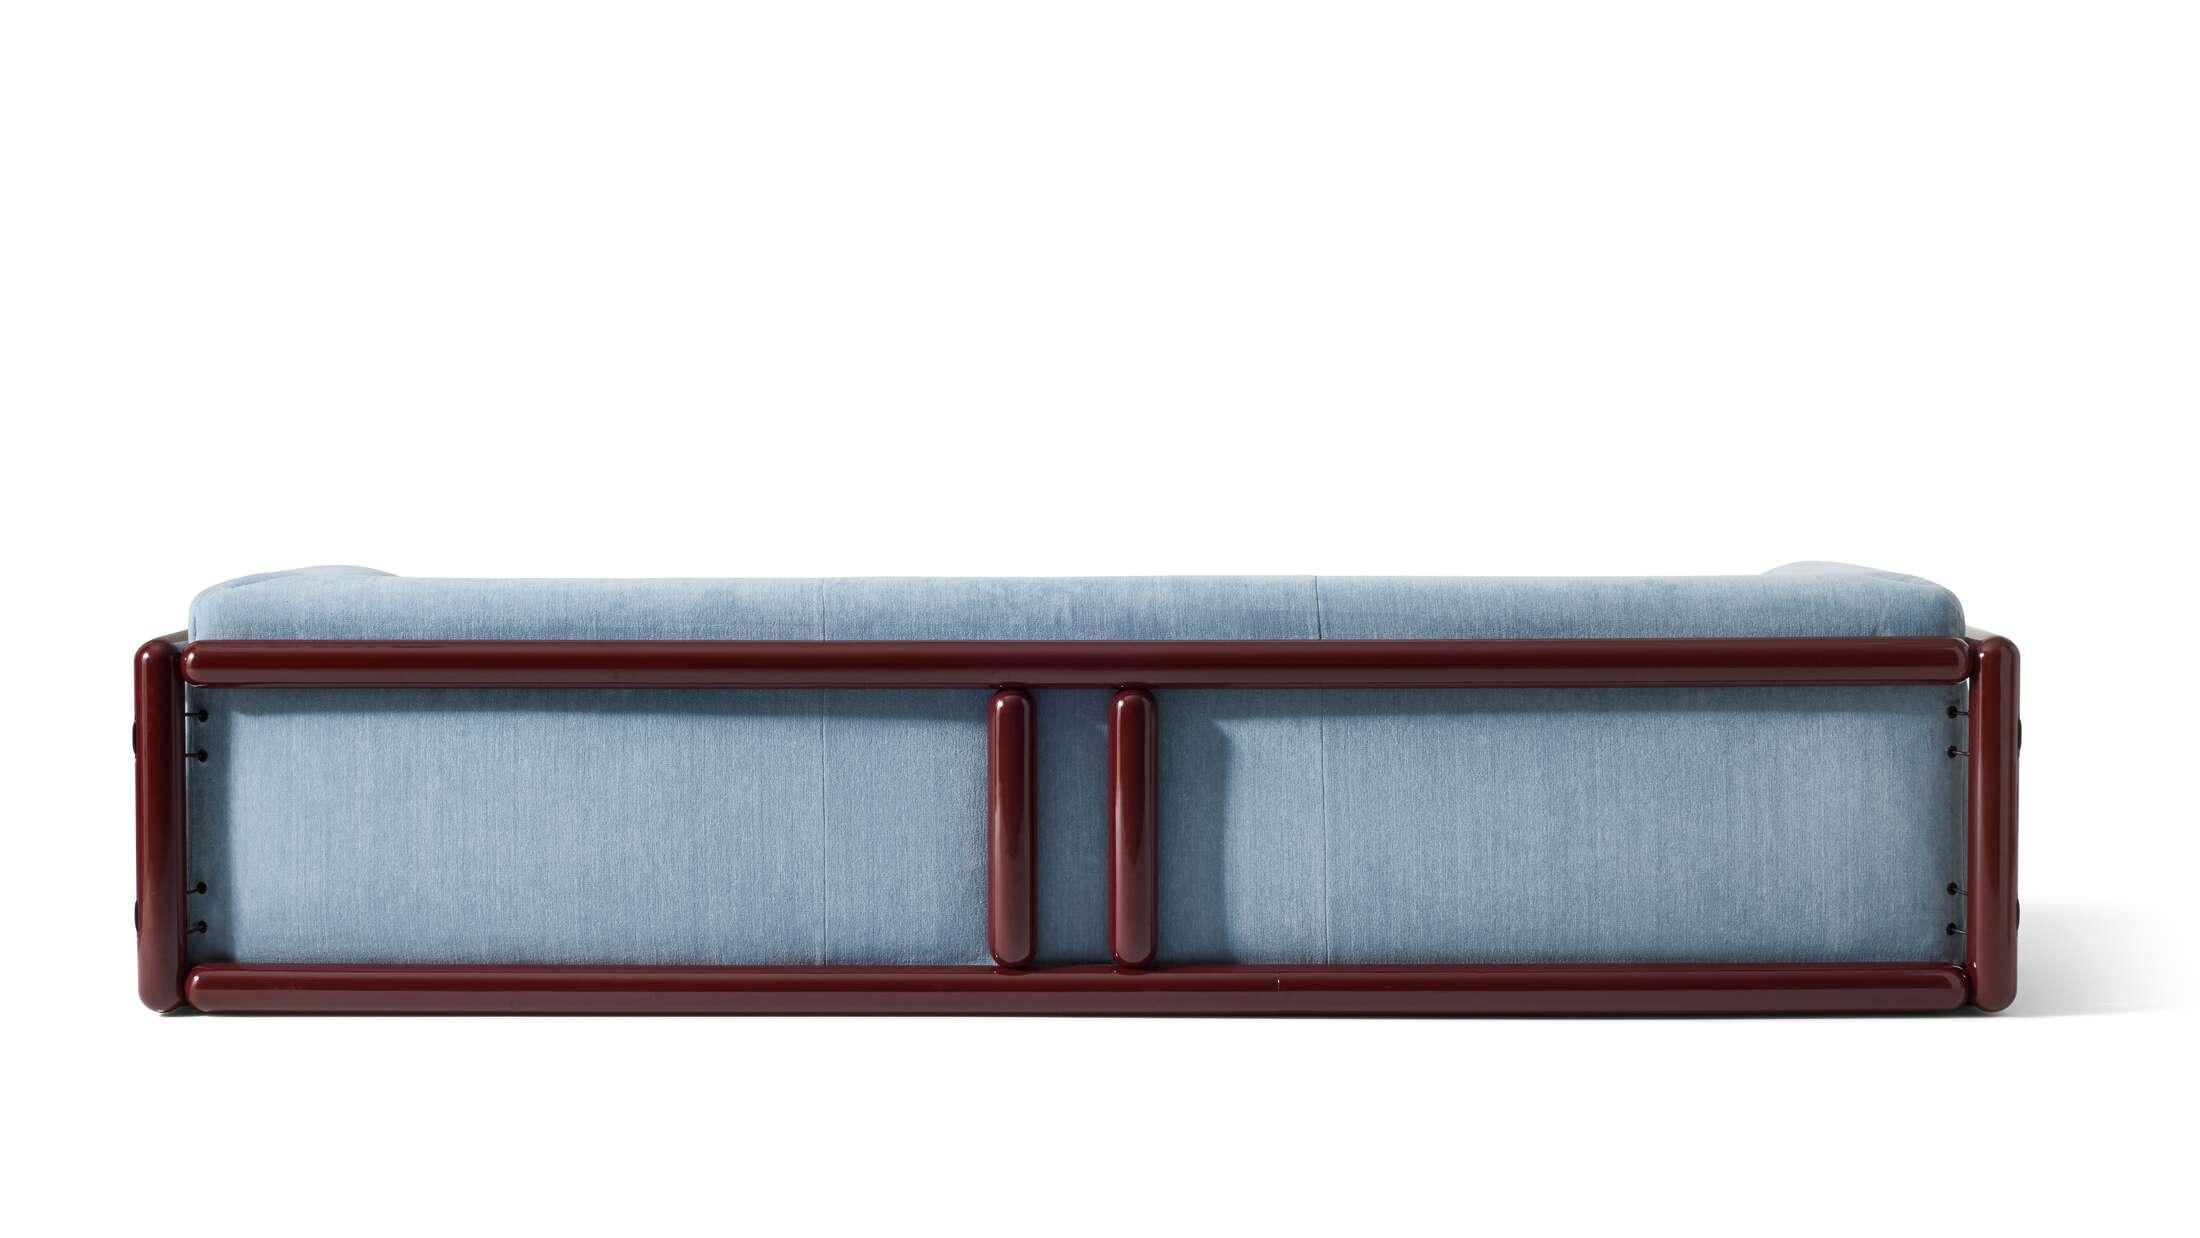 Carlo Scarpa Cornaro Three Seater Sofa 
Manufactured by Cassina

SCULPTURAL ELEGANCE

Geometric austerity encounters enveloping padding in this sofa designed by maestro Carlo Scarpa in 1973.

Based on the contrast between the wooden structure and